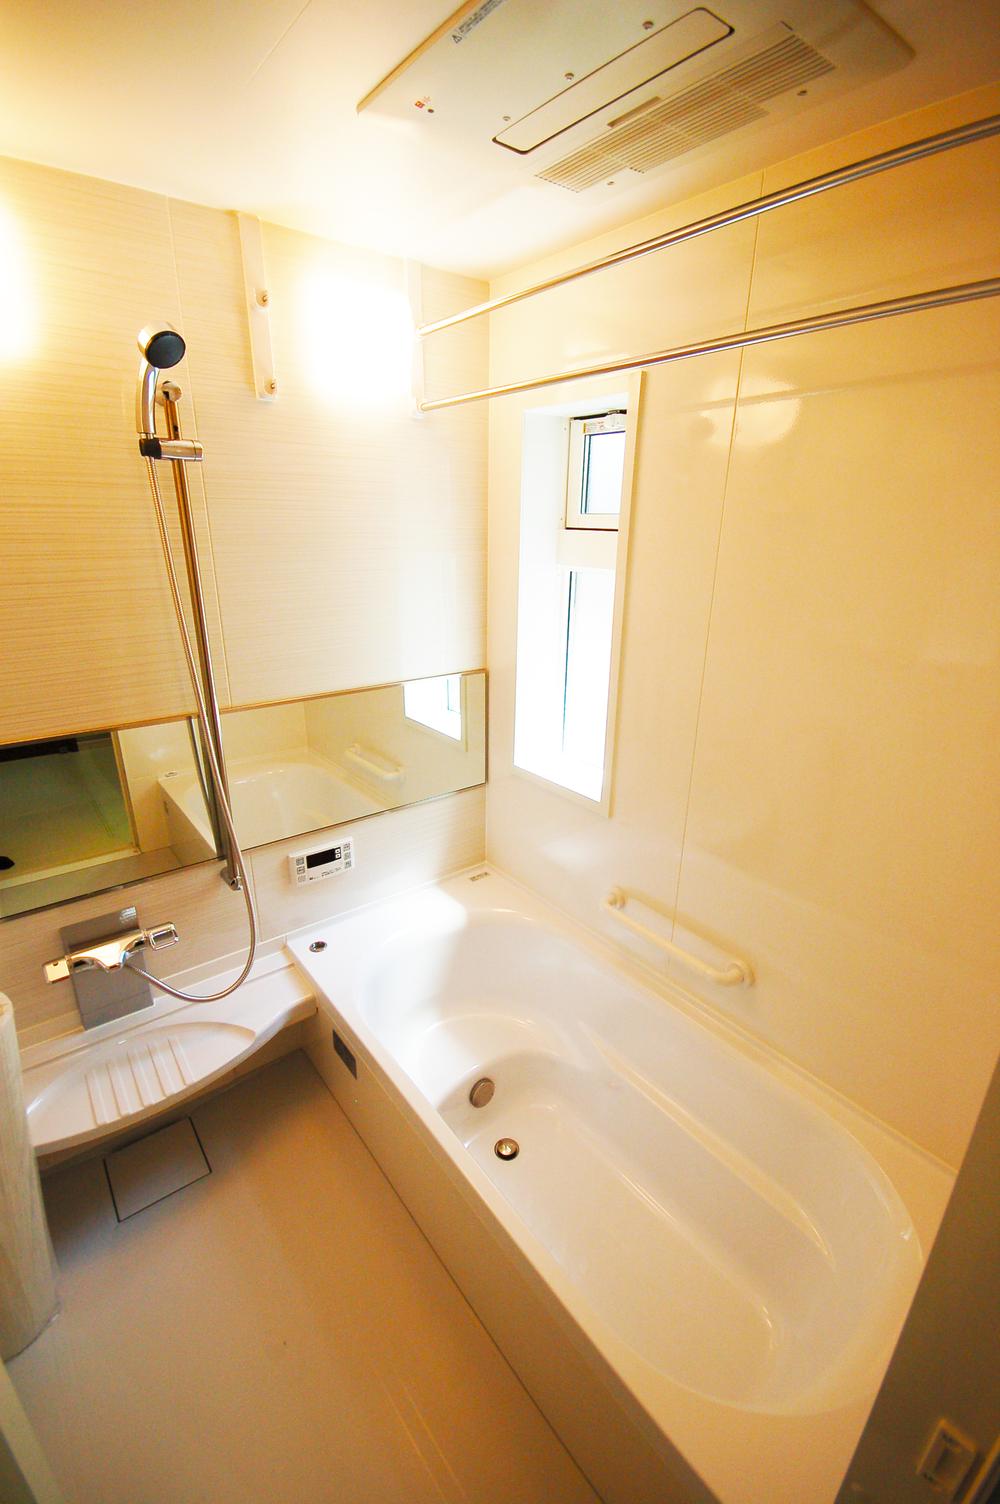 Bathroom. In spacious bathroom there is a feeling of cleanliness, You can heal the fatigue of the day slowly.